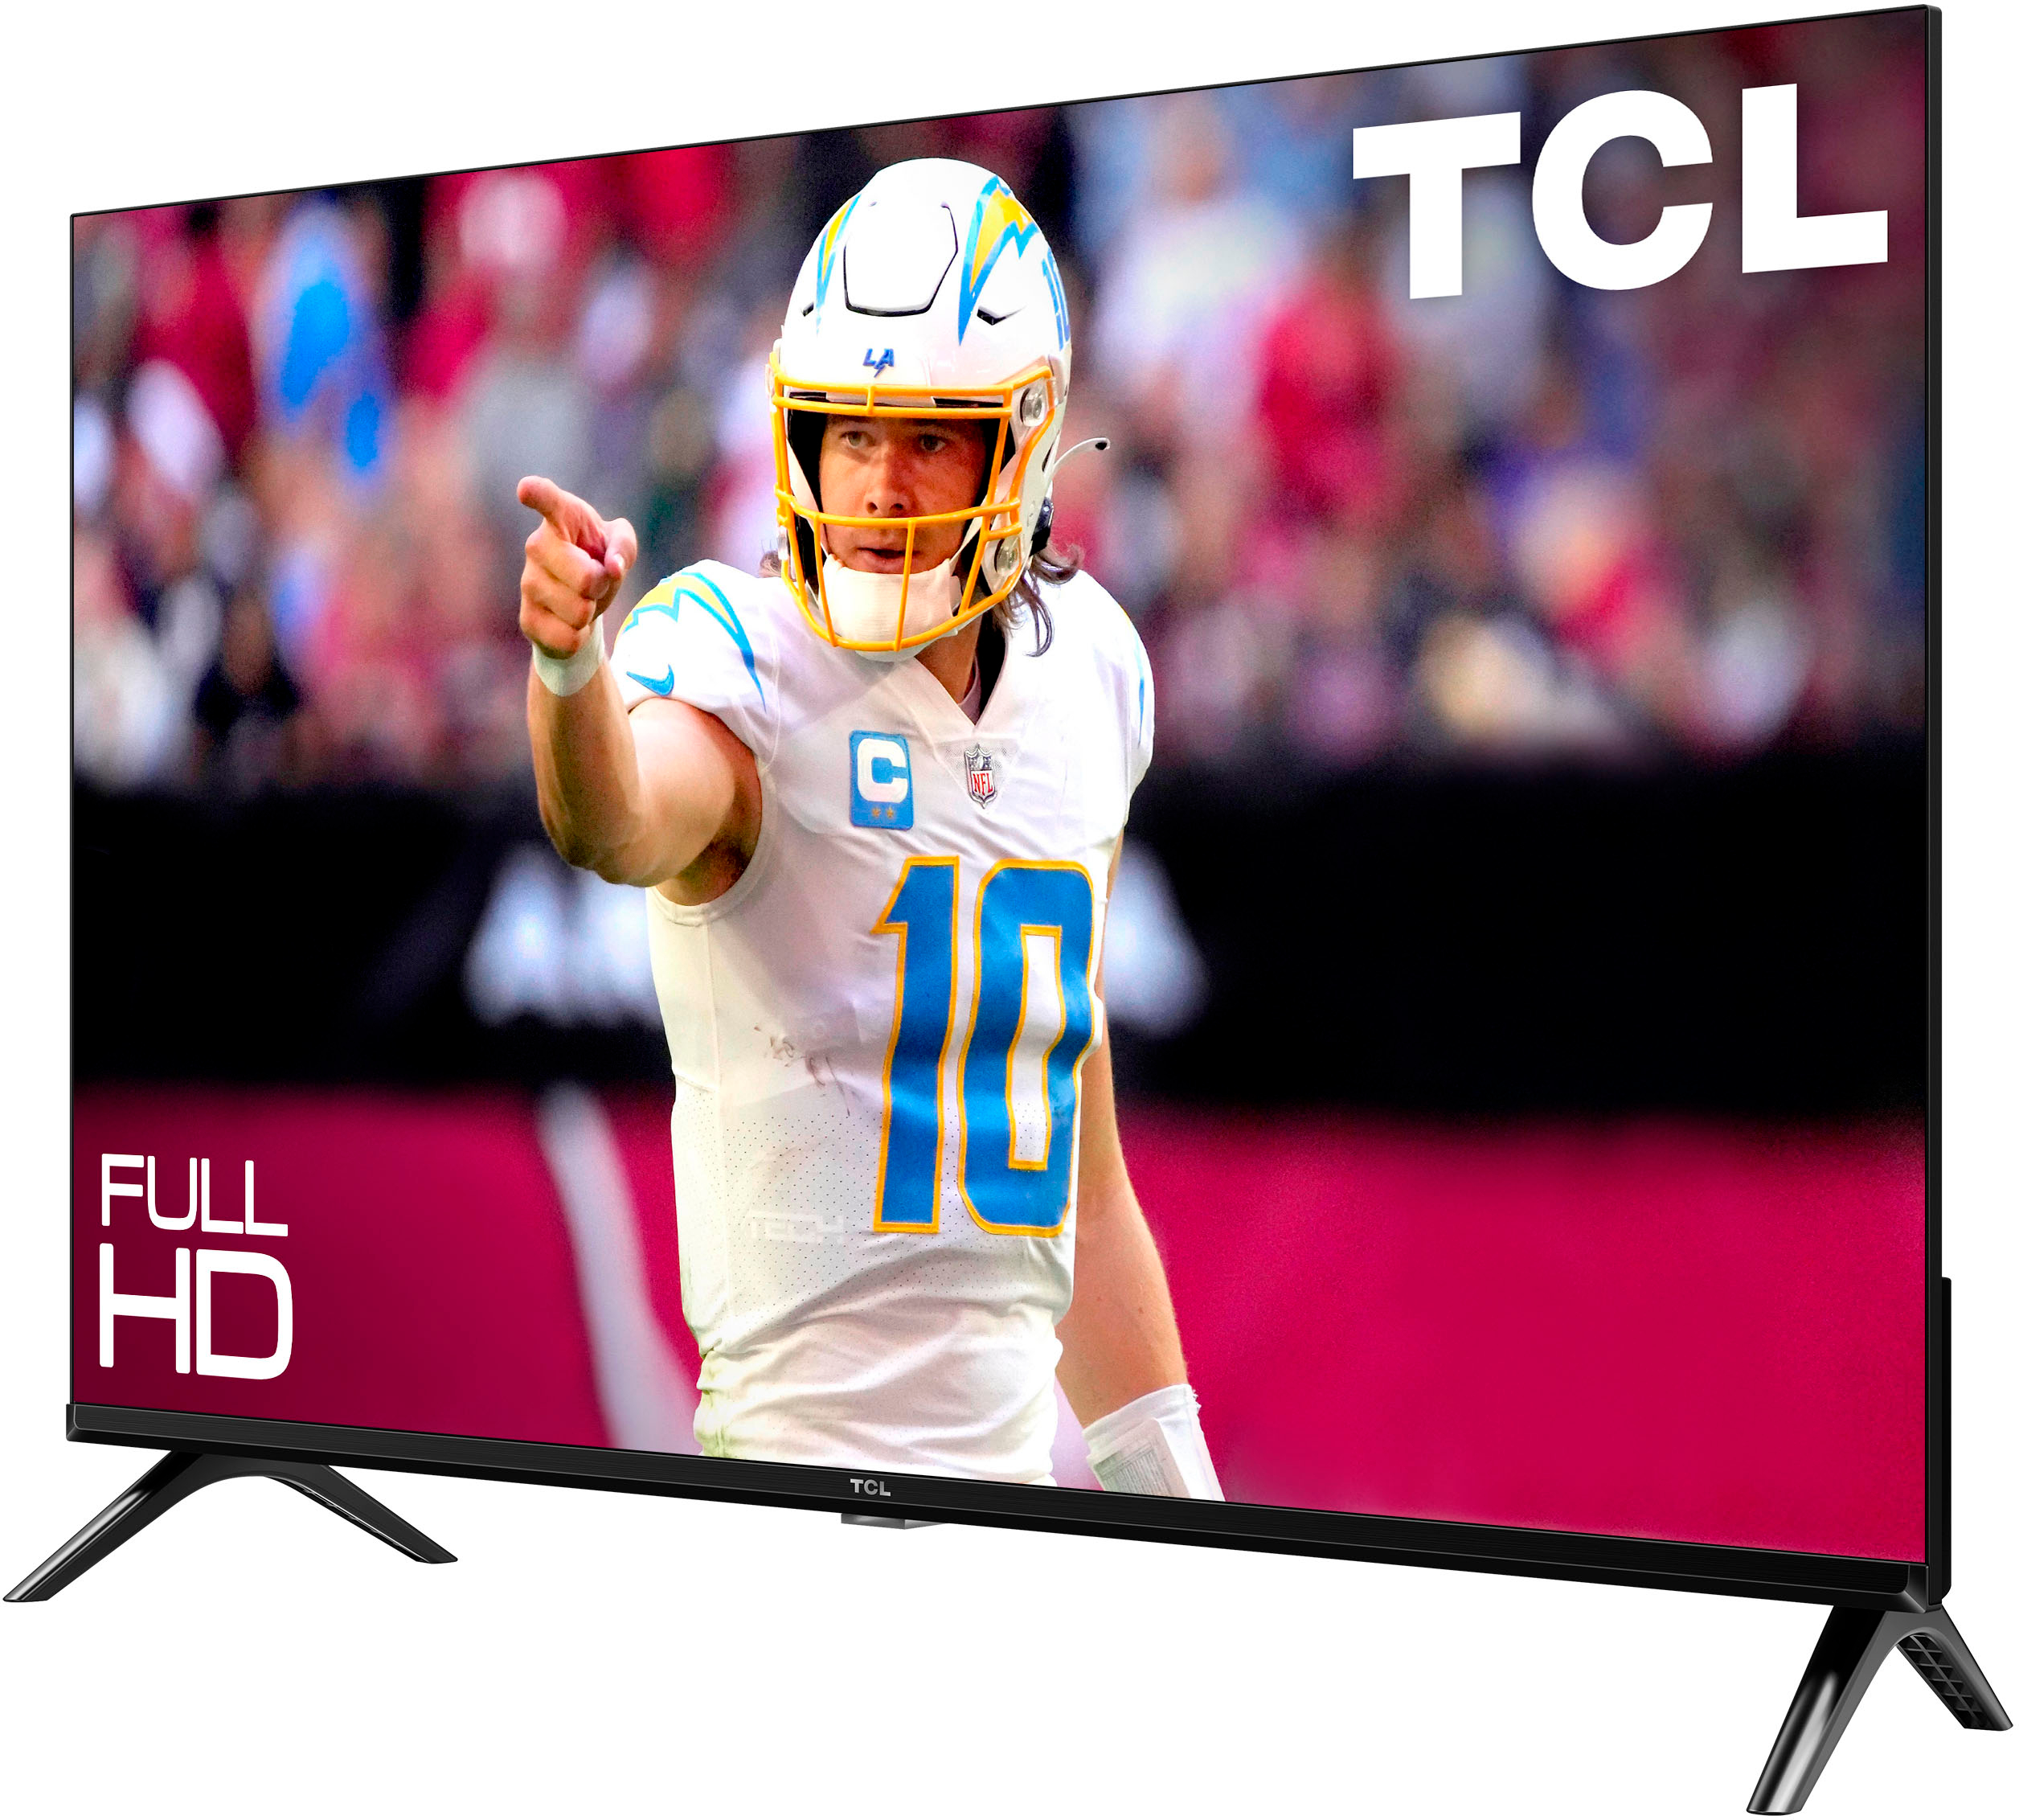 Left View: TCL - 43" Class S3 S-Class 1080p FHD HDR LED Smart TV with Google TV